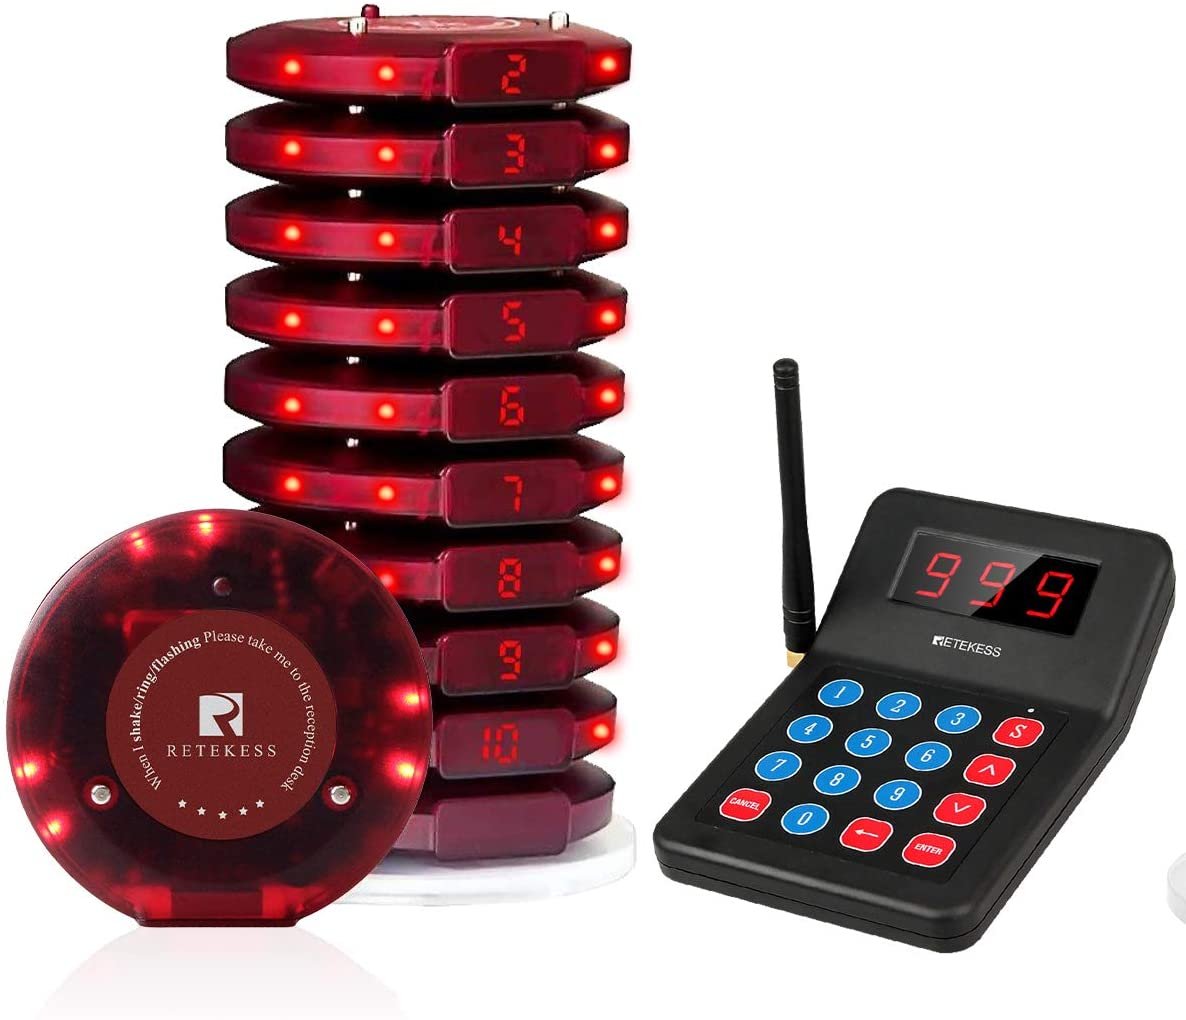 Wireless Paging System T119 Restaurant for Business